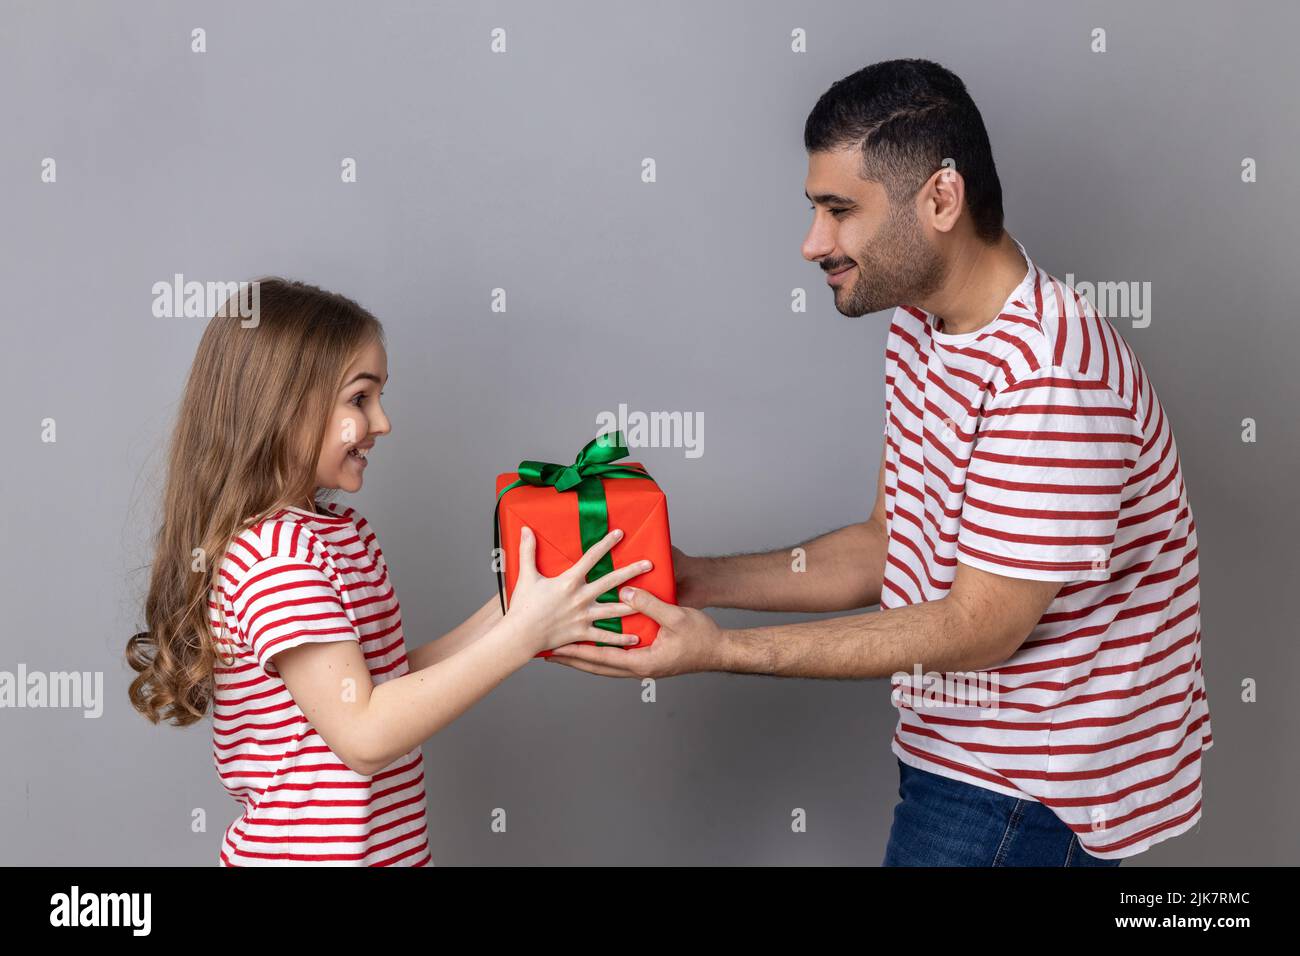 Portrait of satisfied father and daughter in striped T-shirts, man giving present box to his cute child, celebrating birthday together. Indoor studio shot isolated on gray background. Stock Photo